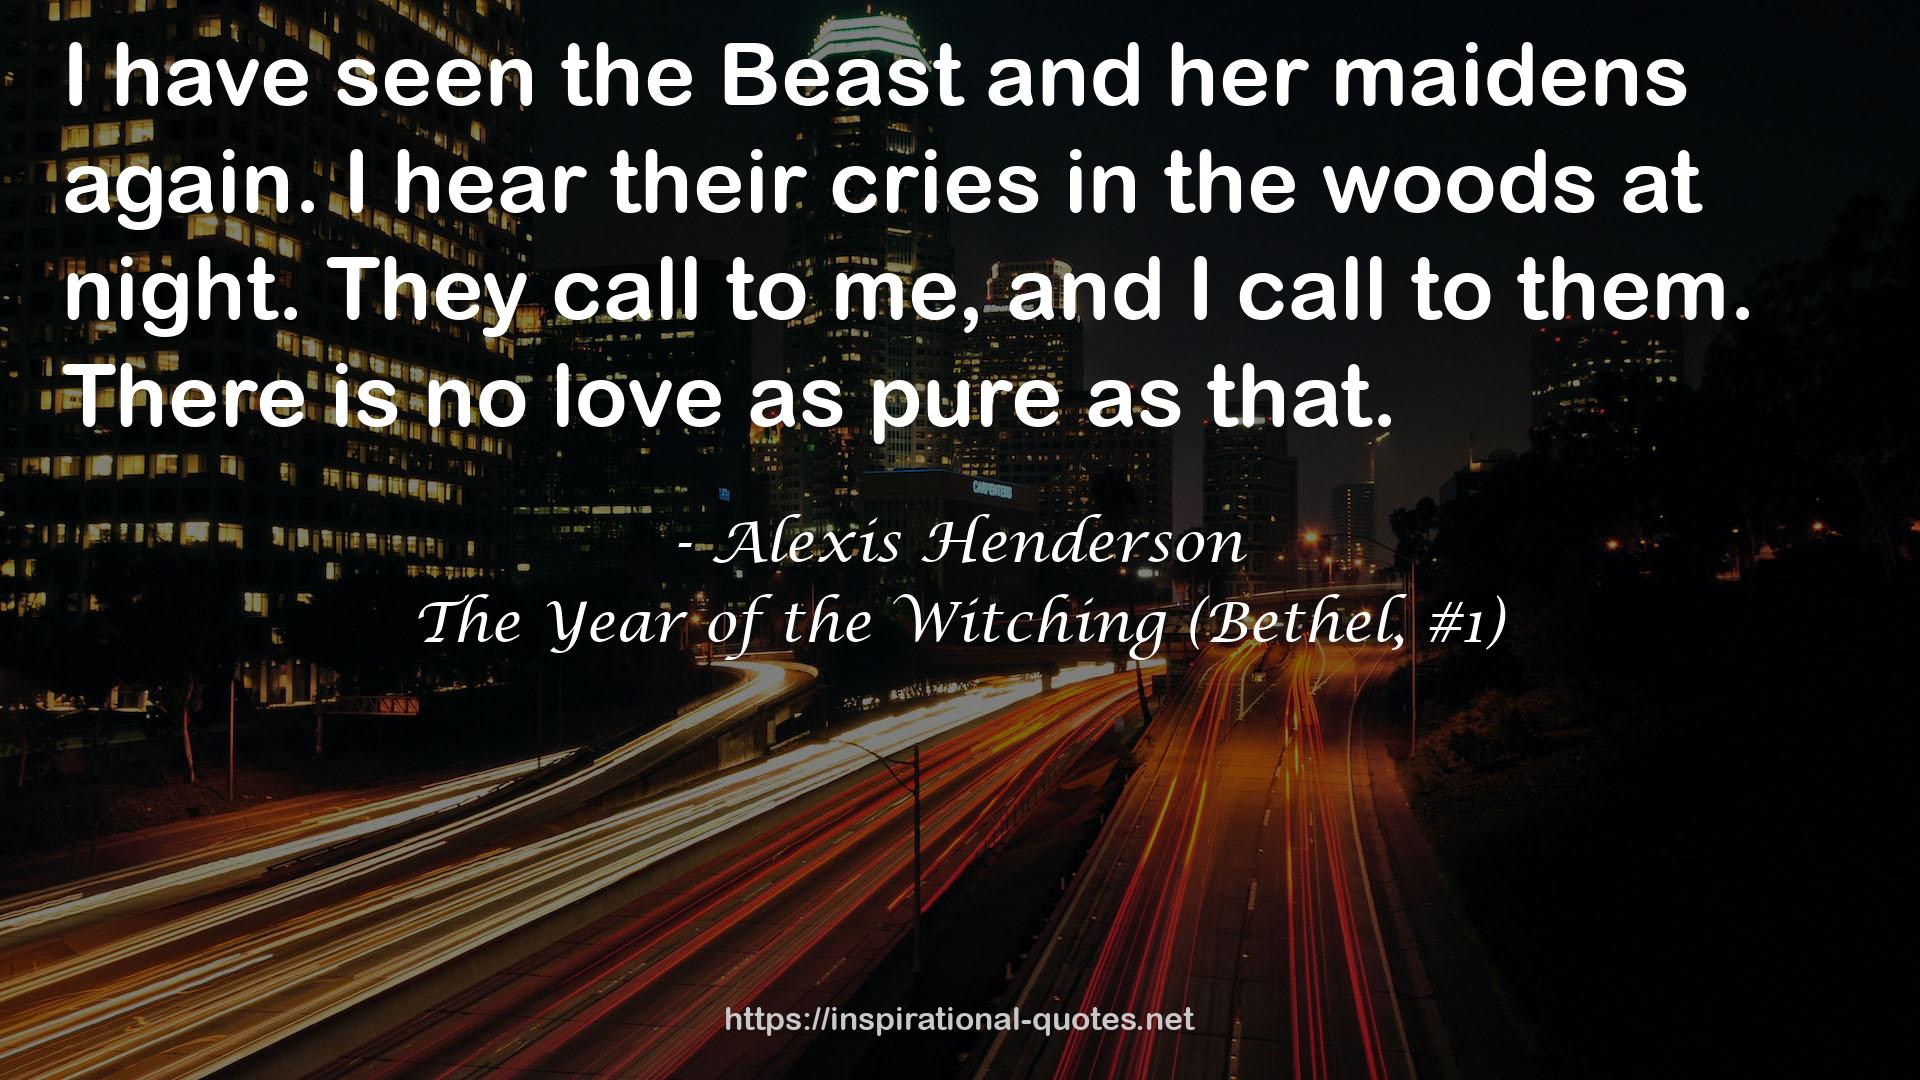 The Year of the Witching (Bethel, #1) QUOTES